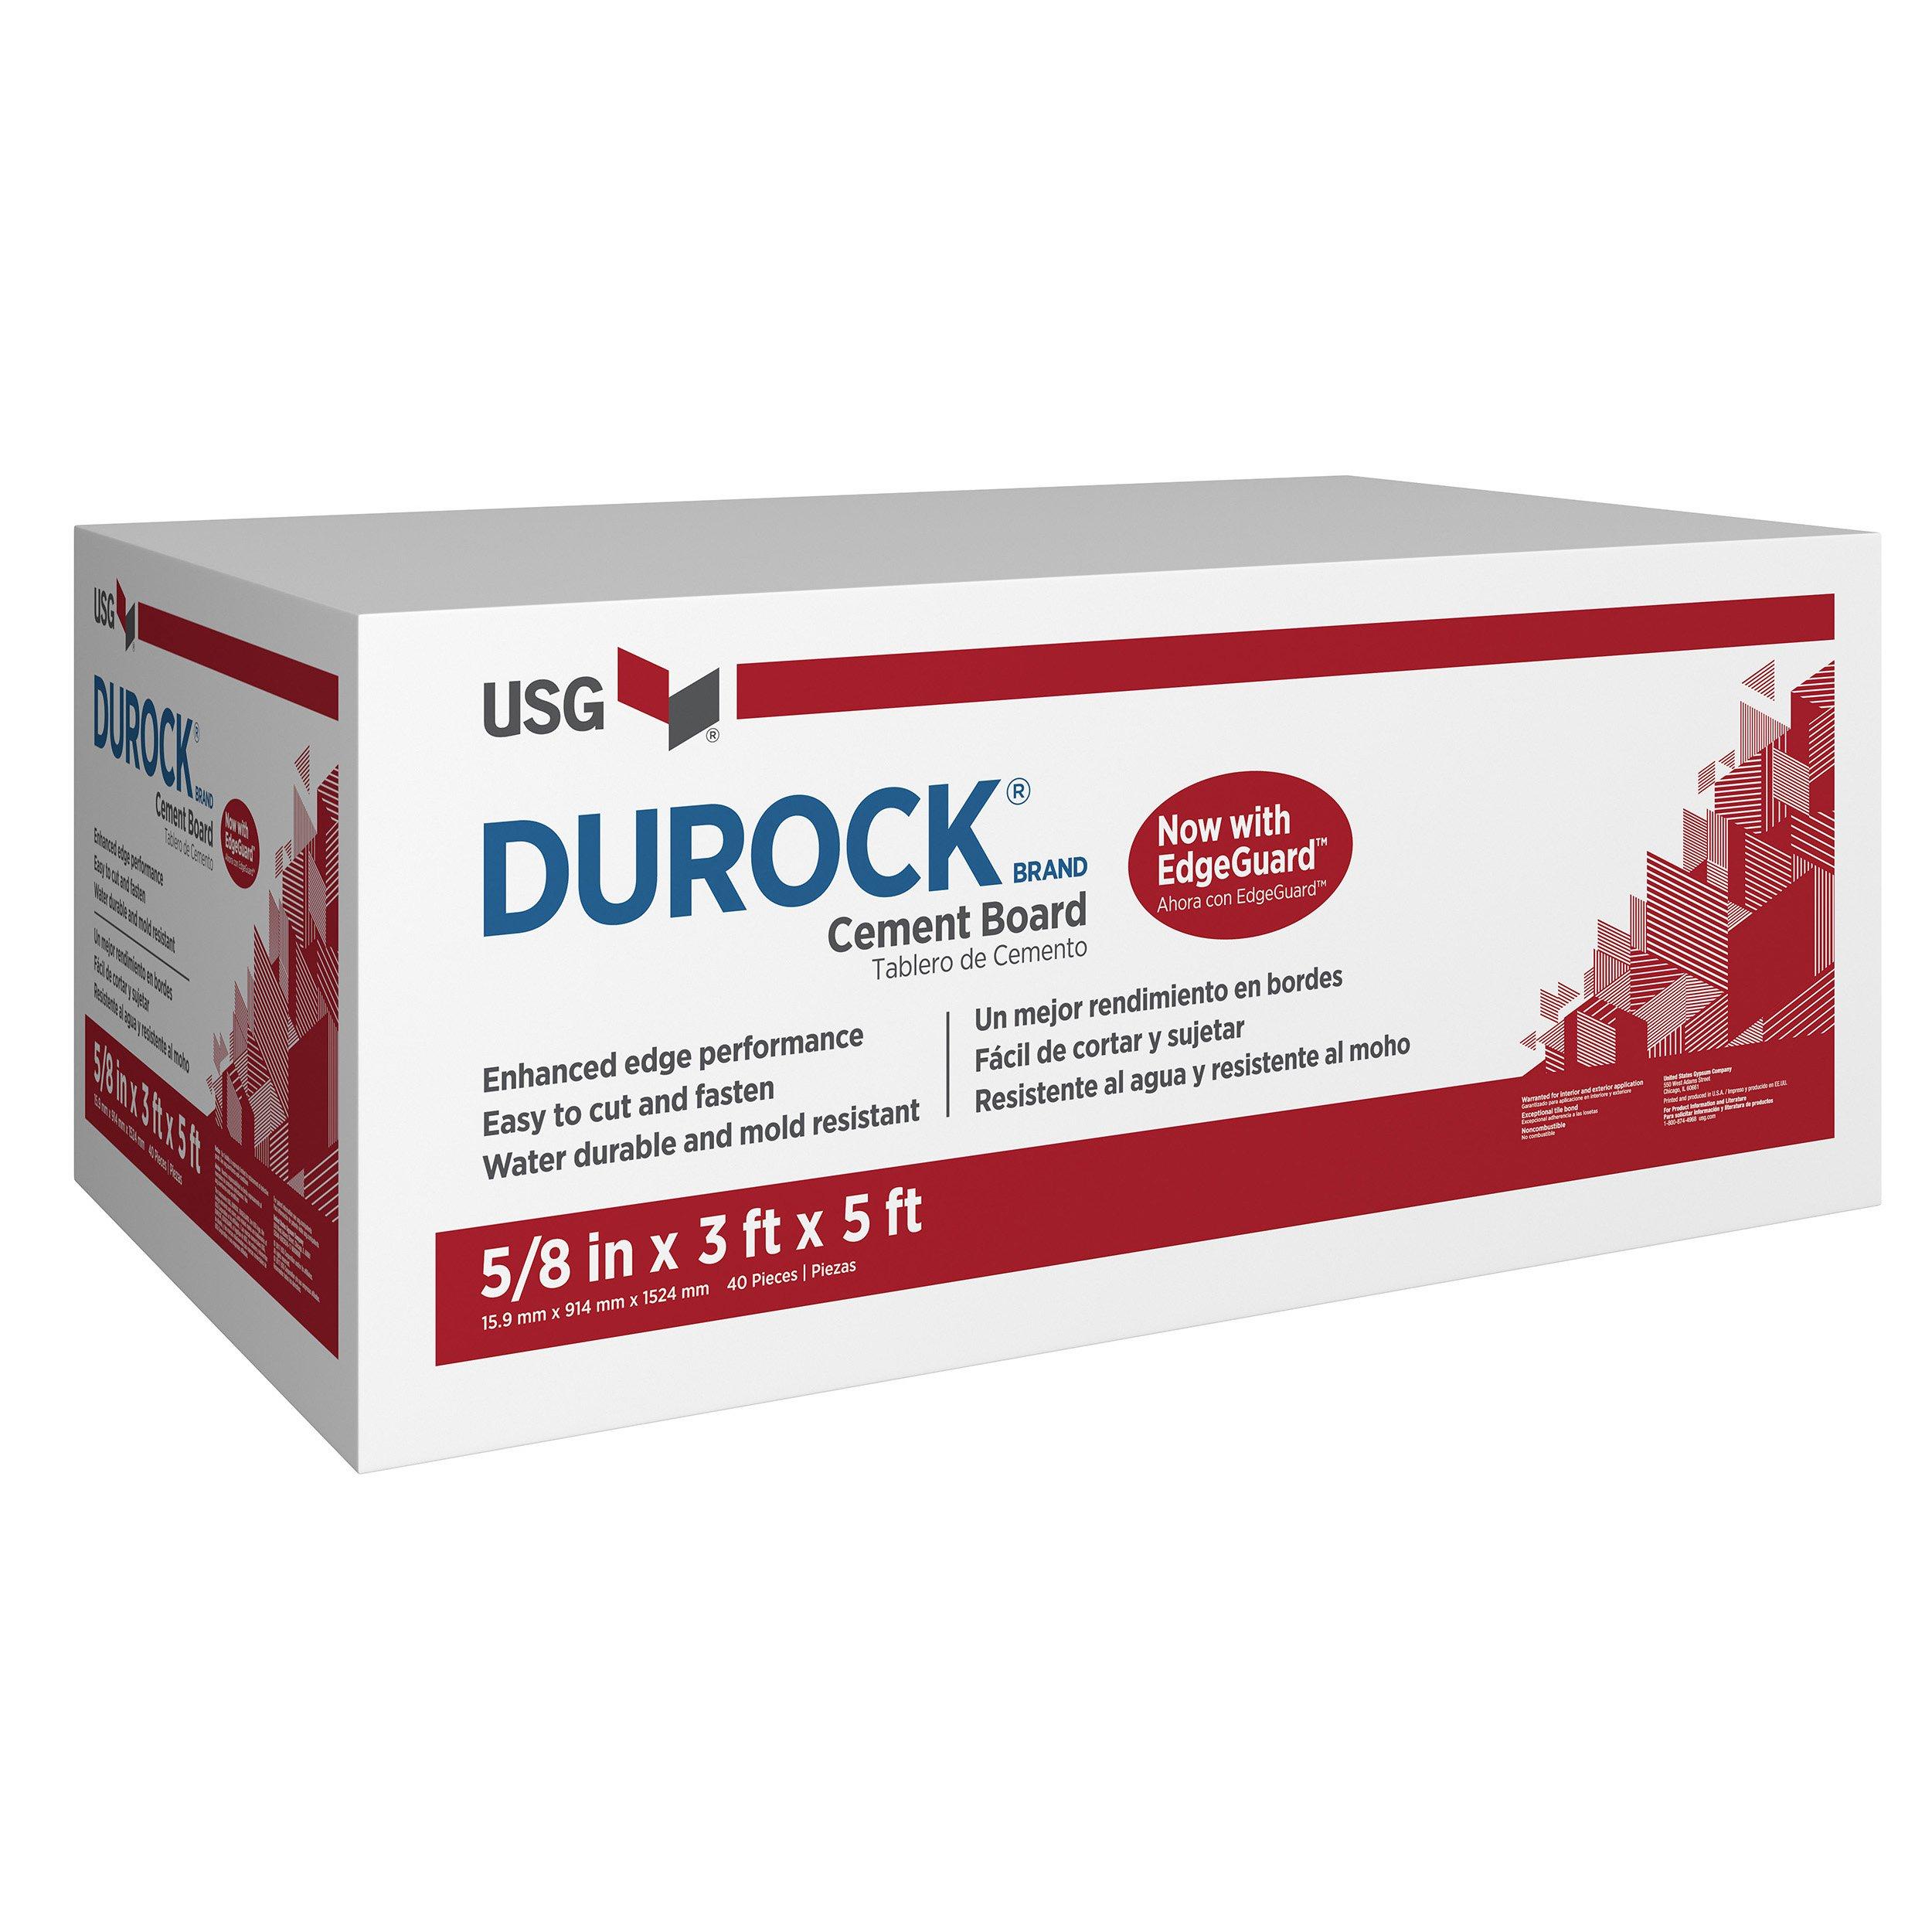 Durock Cement Board with EdgeGuard